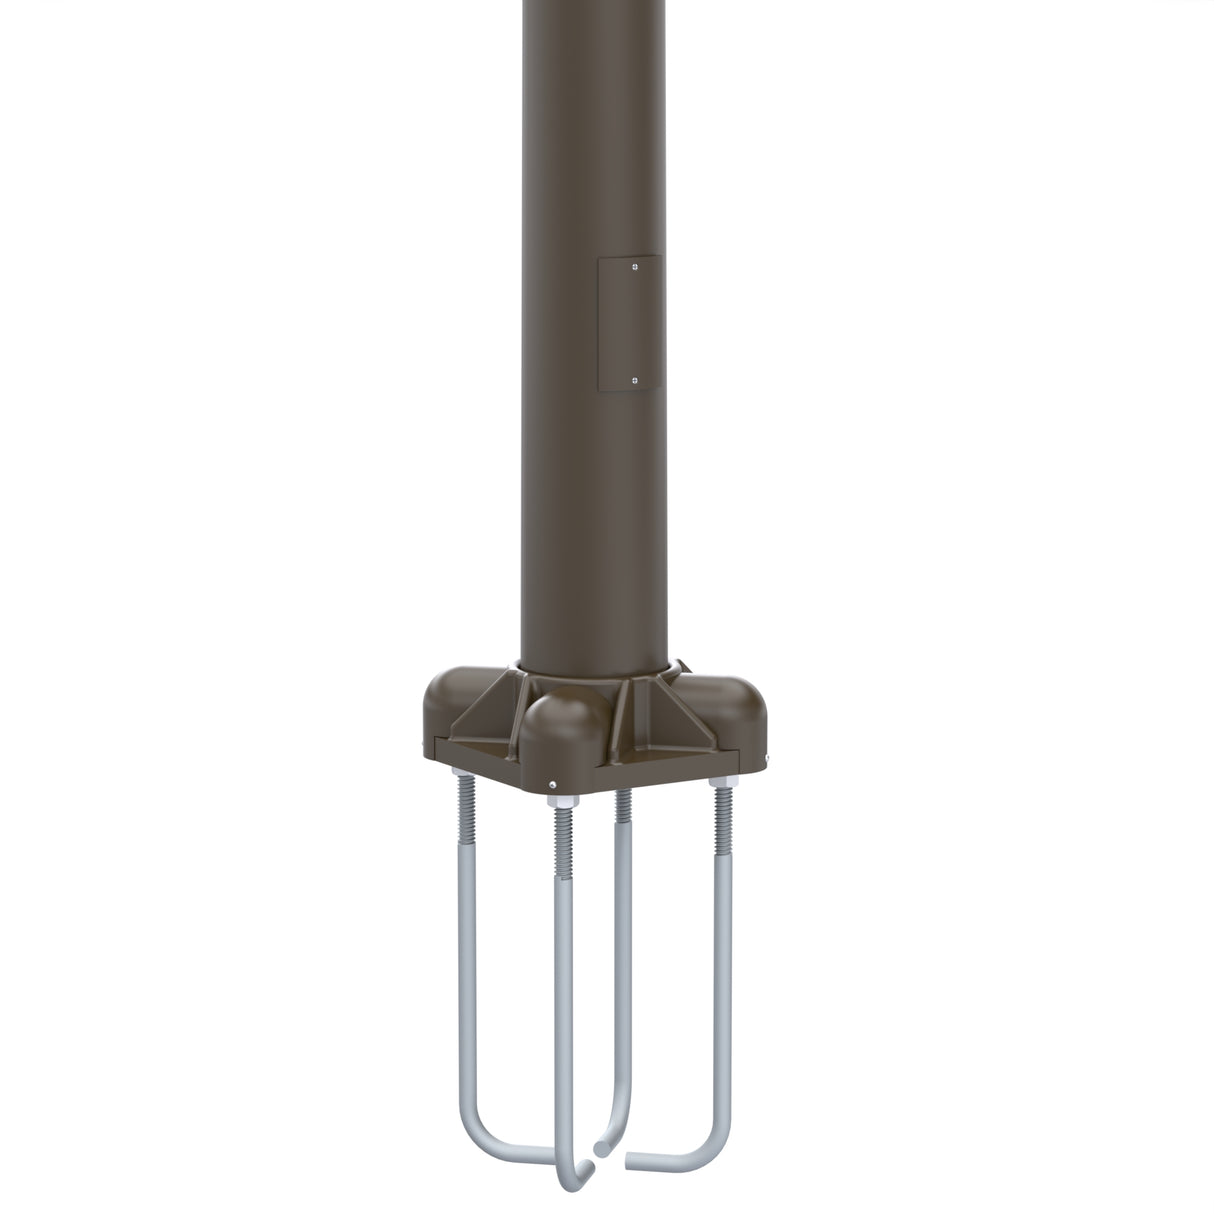 30' Tall x 8.0" Base OD x 4.5" Top OD x 0.156" Thick, Round Tapered Aluminum, Anchor Base Light Pole with 4' Davit Arm